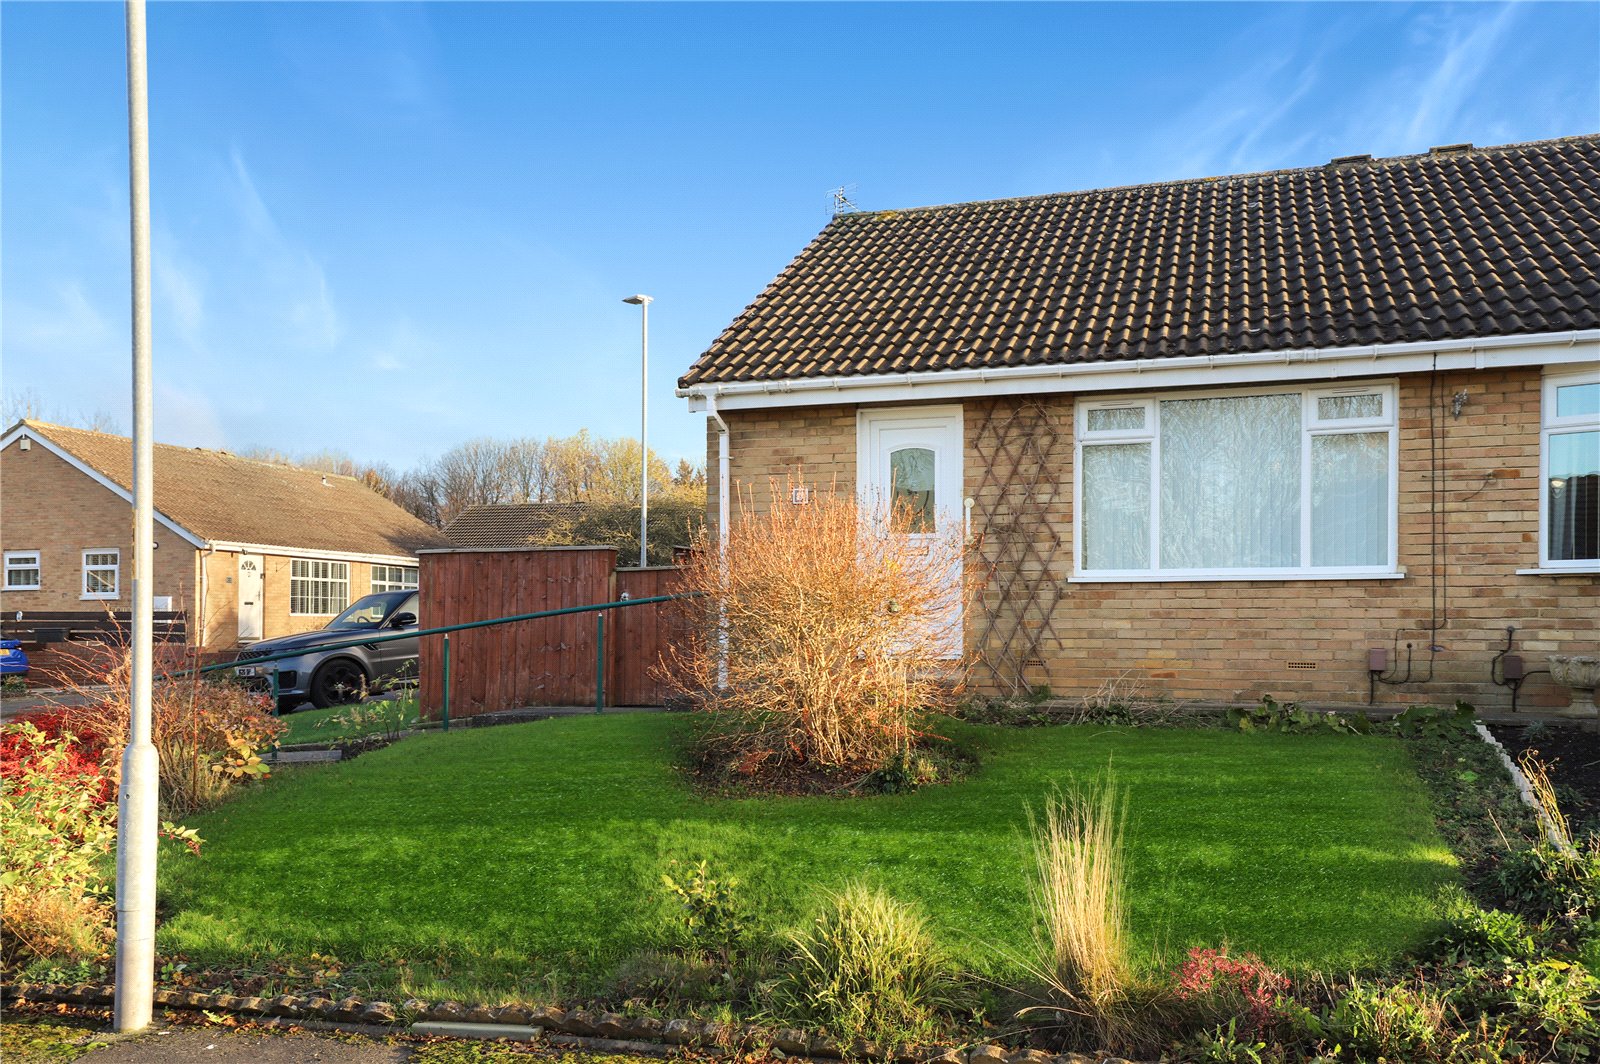 2 bed bungalow for sale in Kennthorpe, Nunthorpe  - Property Image 2